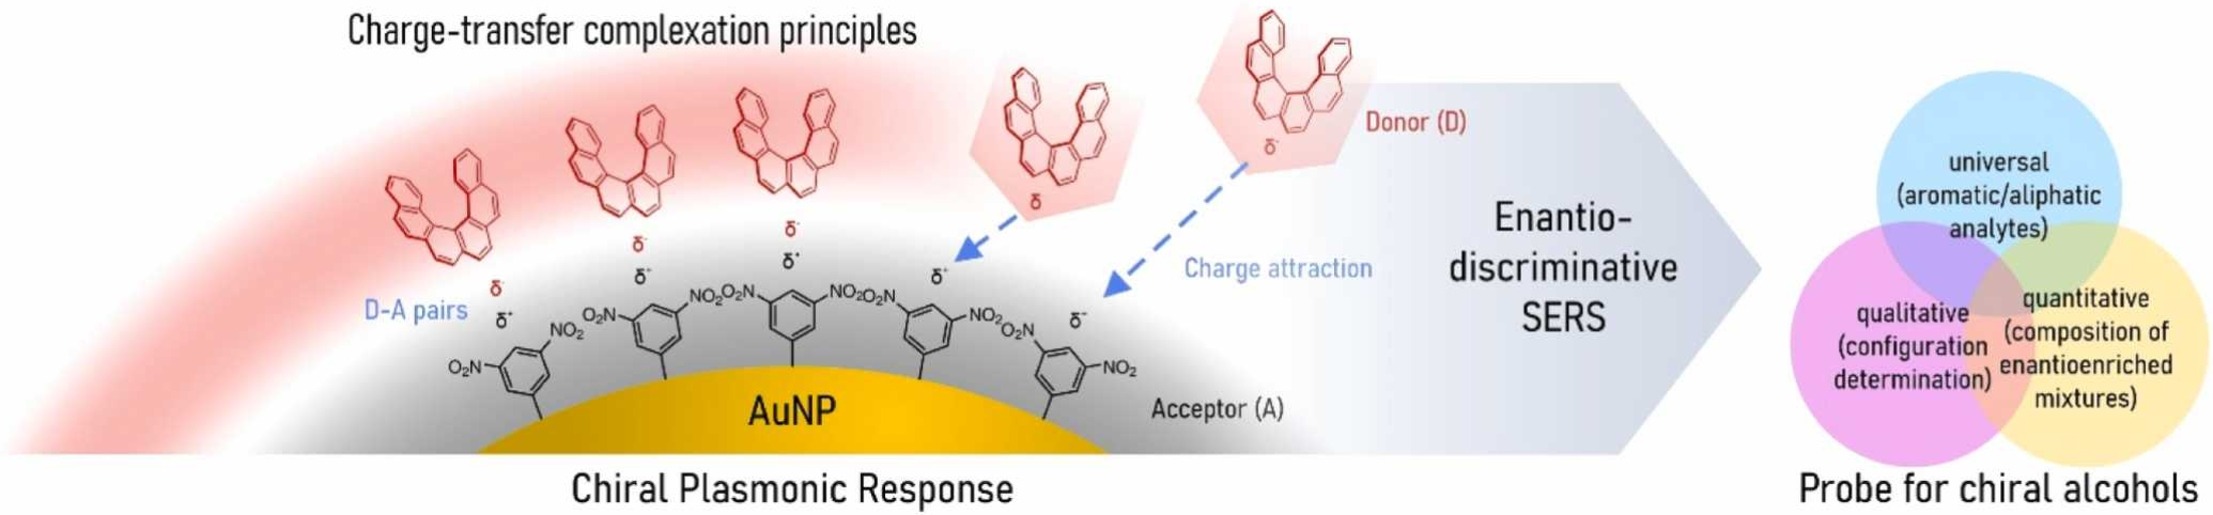 Charge-Transfer Complexation